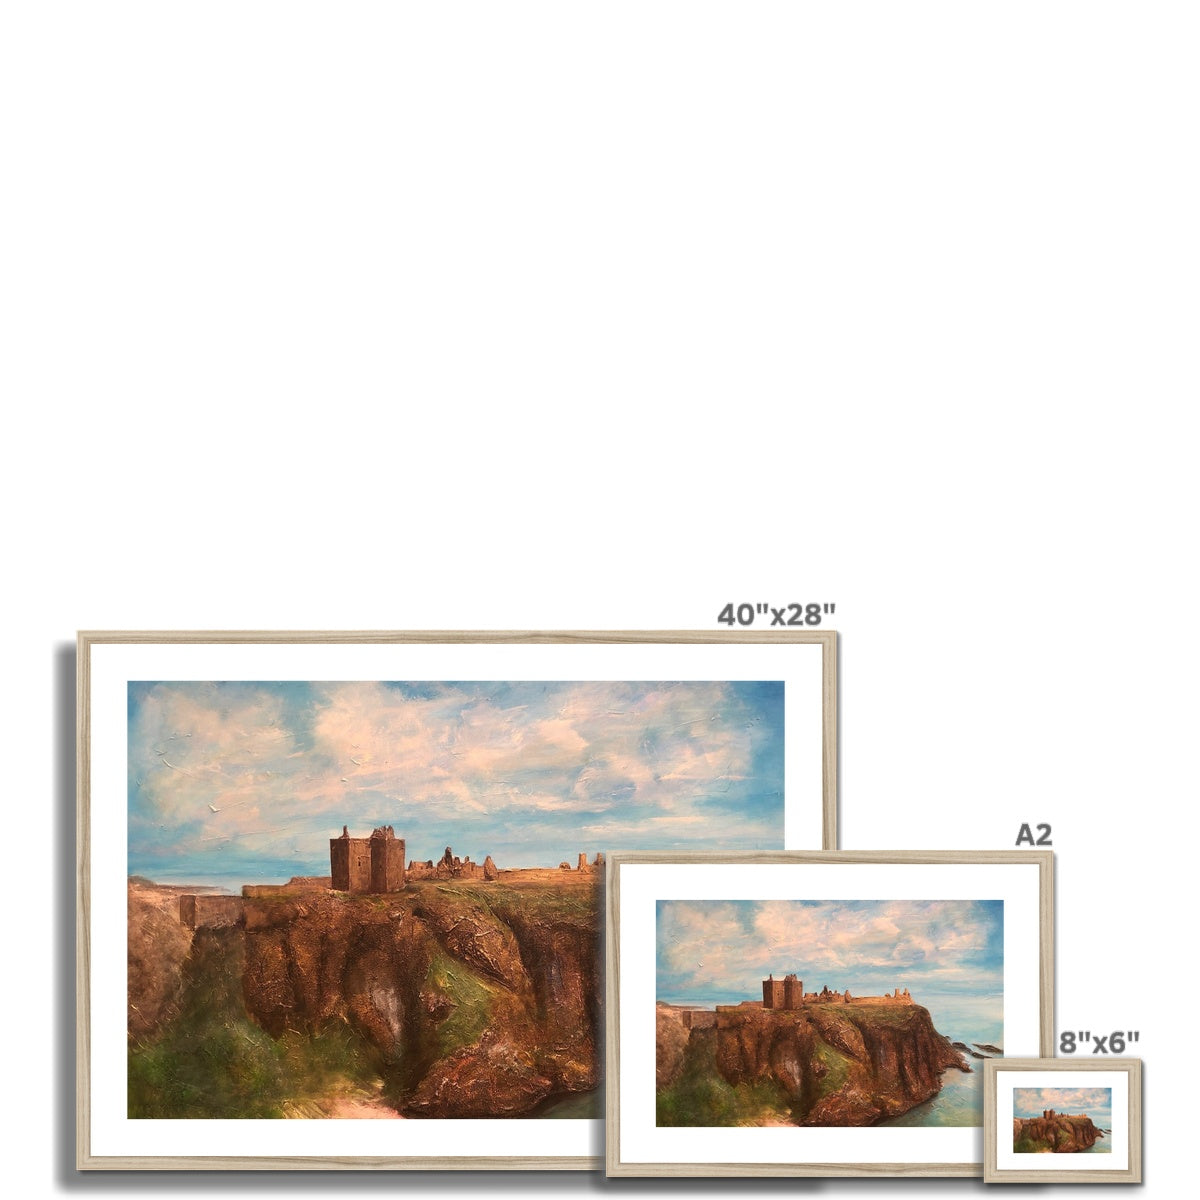 Dunnottar Castle Painting | Framed & Mounted Prints From Scotland-Framed & Mounted Prints-Historic & Iconic Scotland Art Gallery-Paintings, Prints, Homeware, Art Gifts From Scotland By Scottish Artist Kevin Hunter